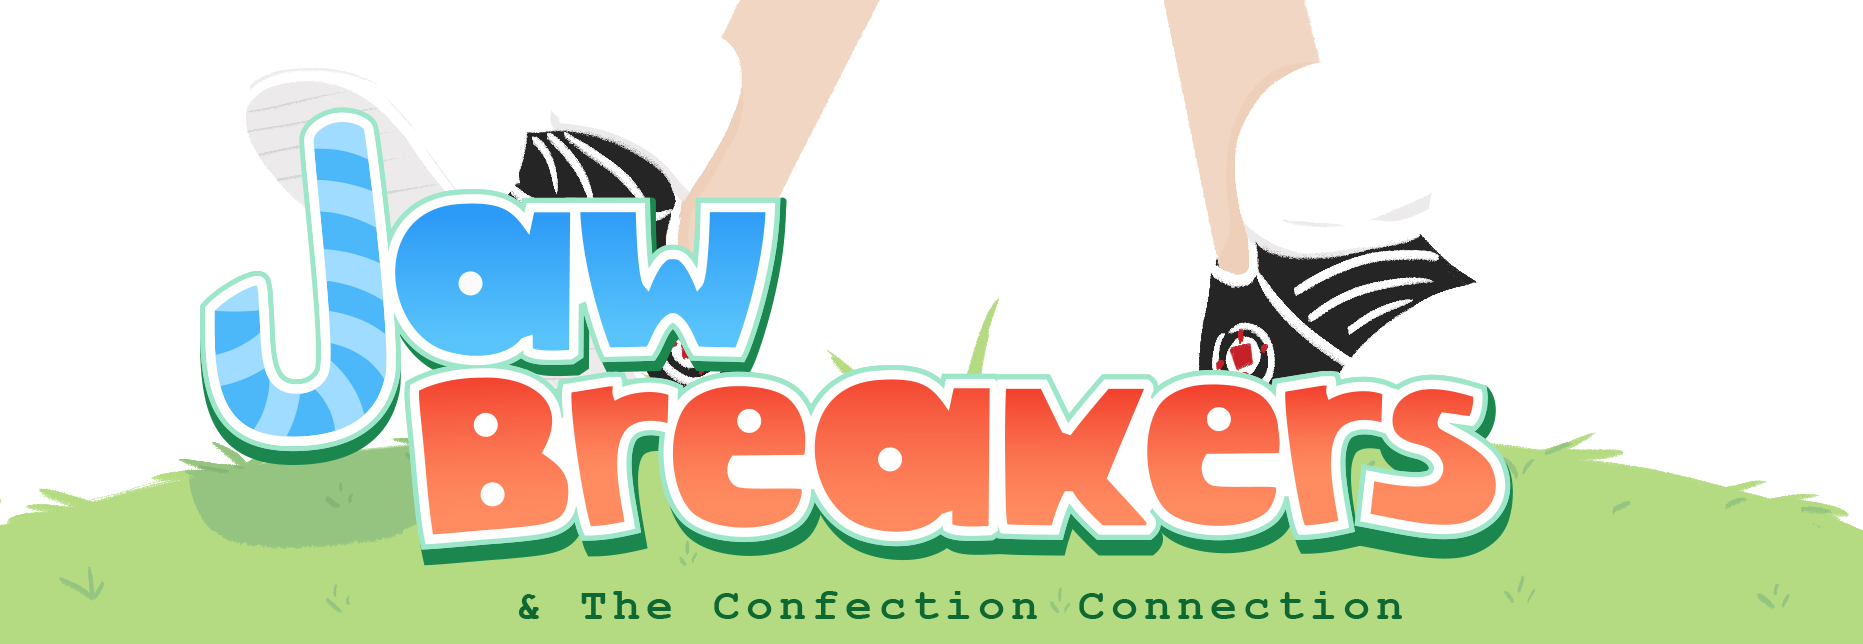 Jaw Breakers & The Confection Connection - Full Game